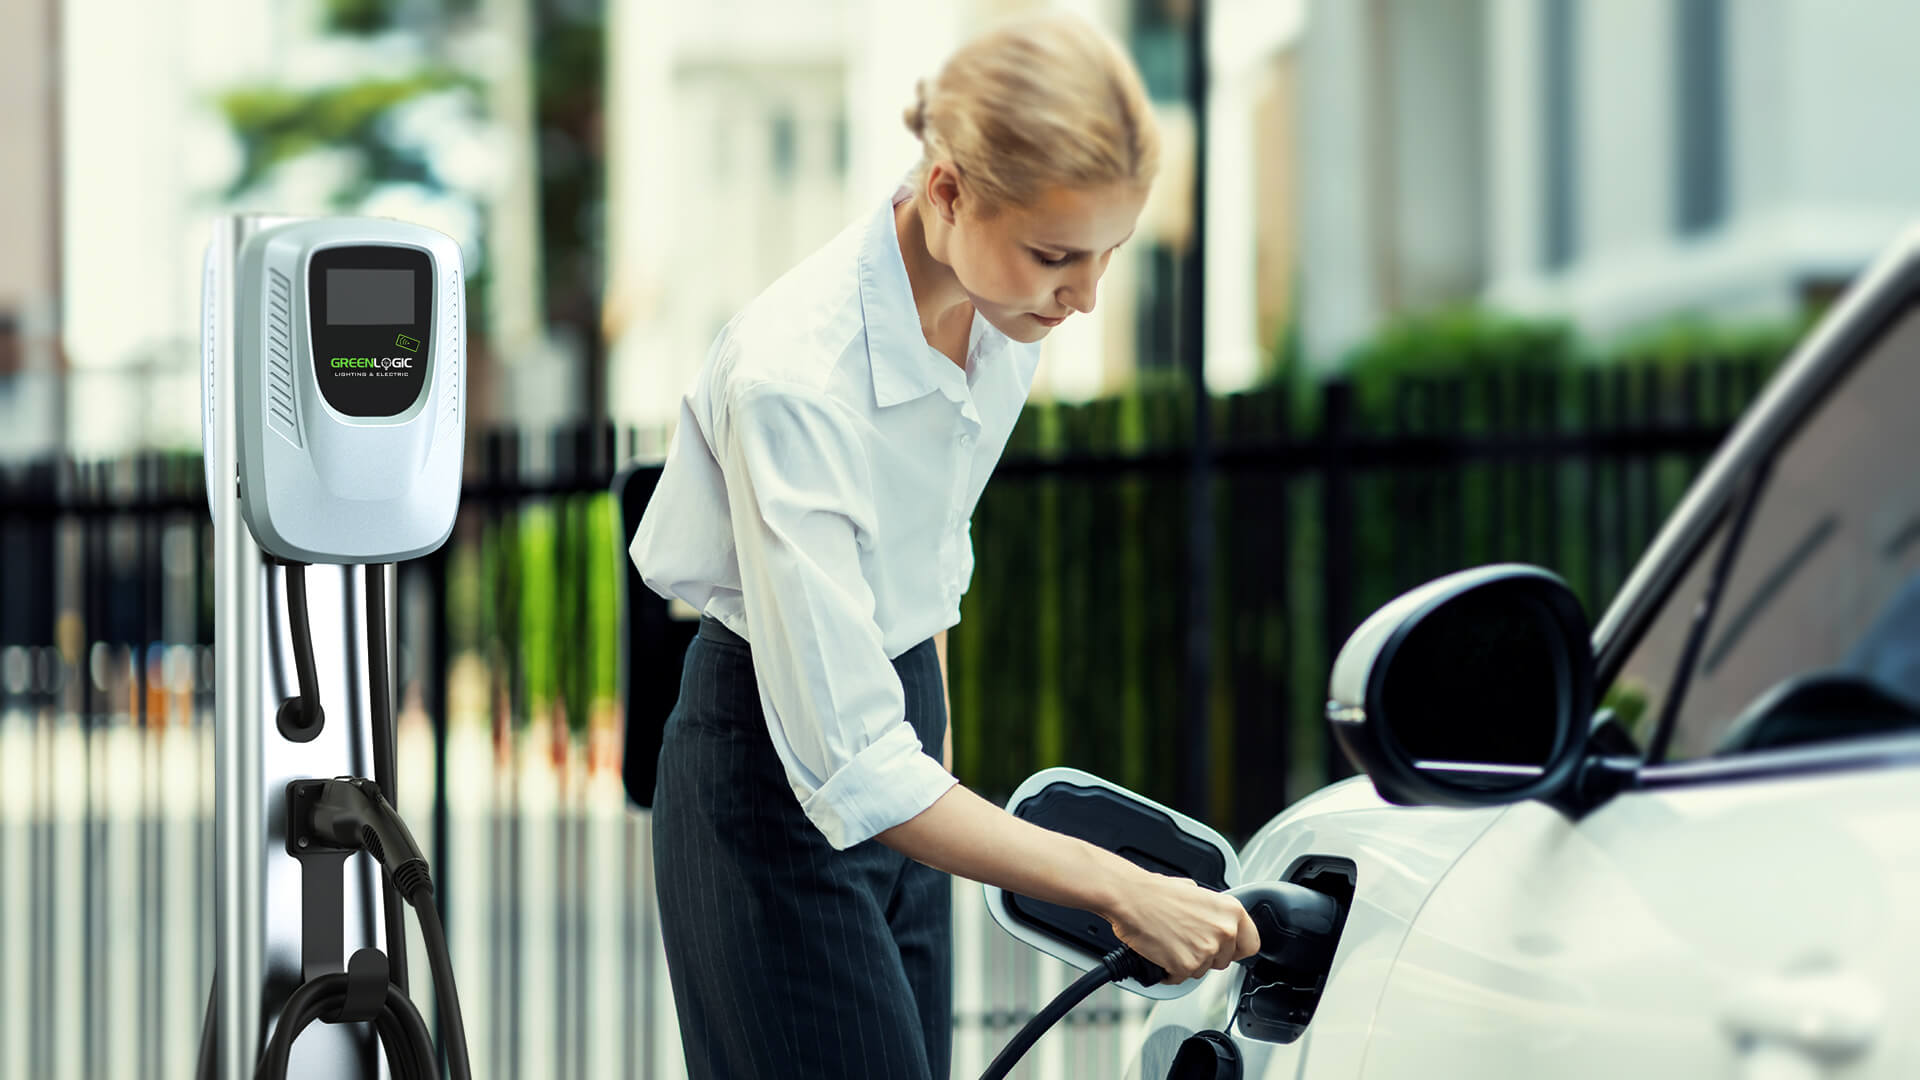 Modern business woman plugging in her car to a Greenlogic EV chargier. The image showcases the convenience and ease of use of Greenlogic's EV Charging Stations.